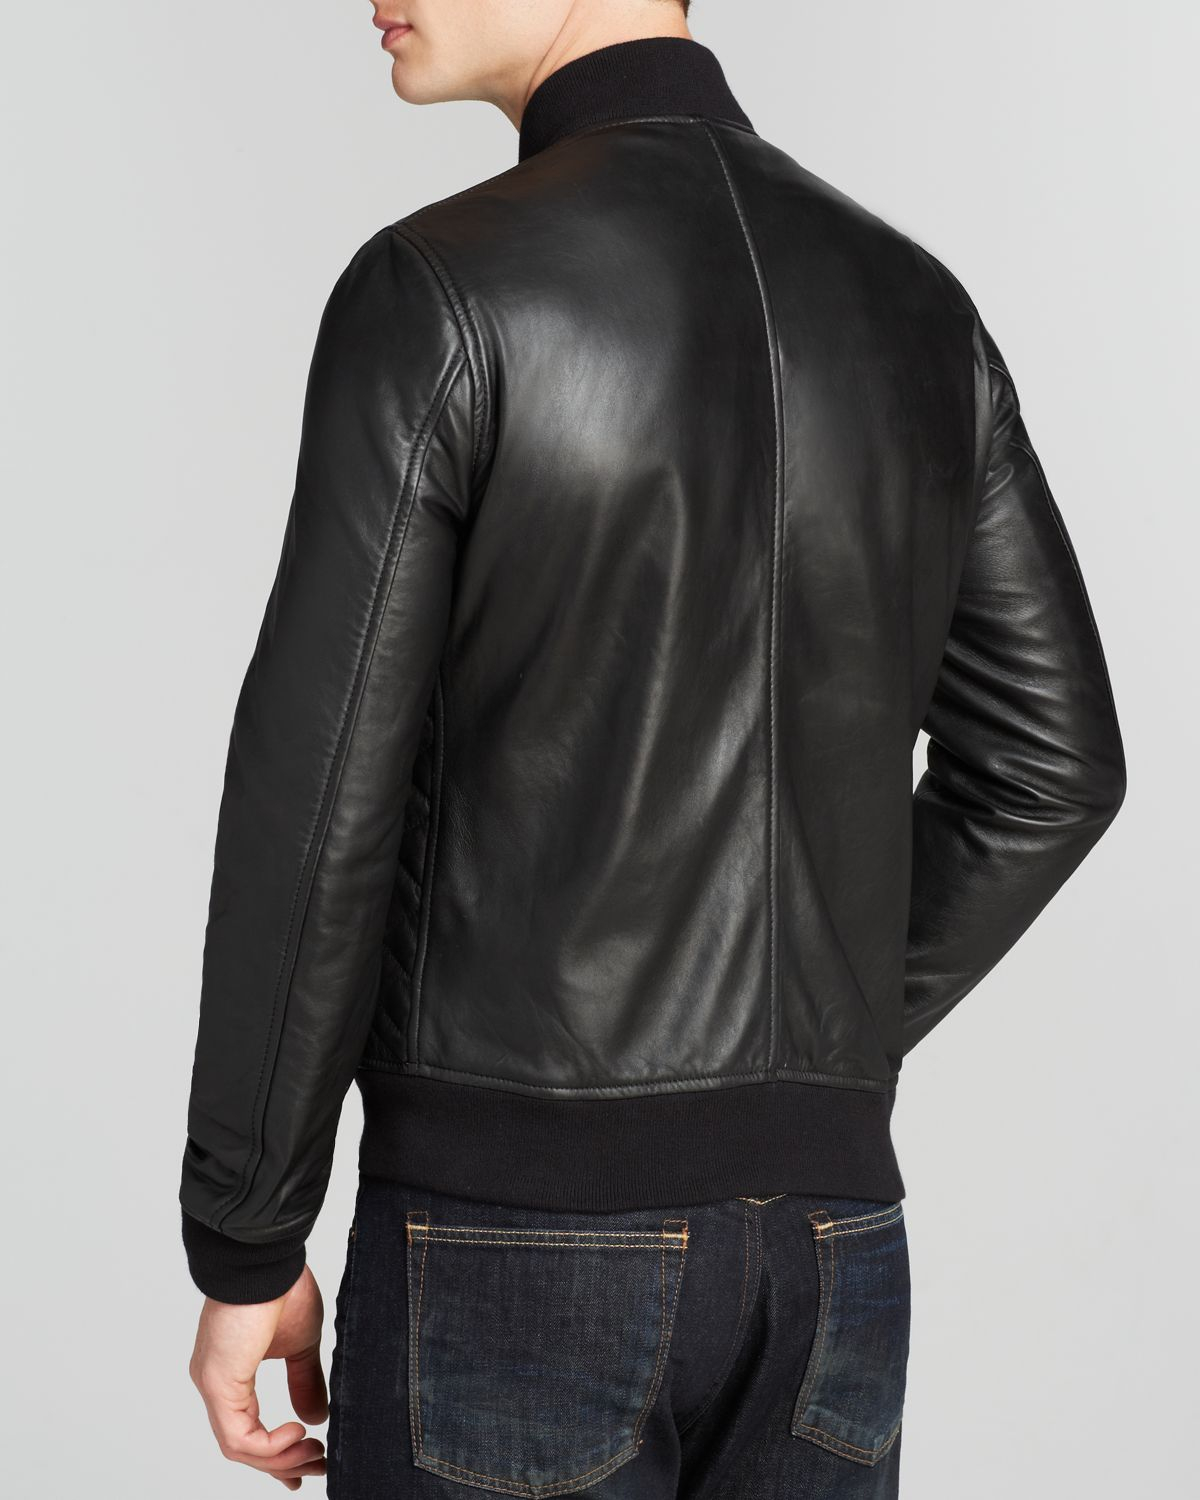 Paul smith Quilted Leather Jacket in Black for Men | Lyst